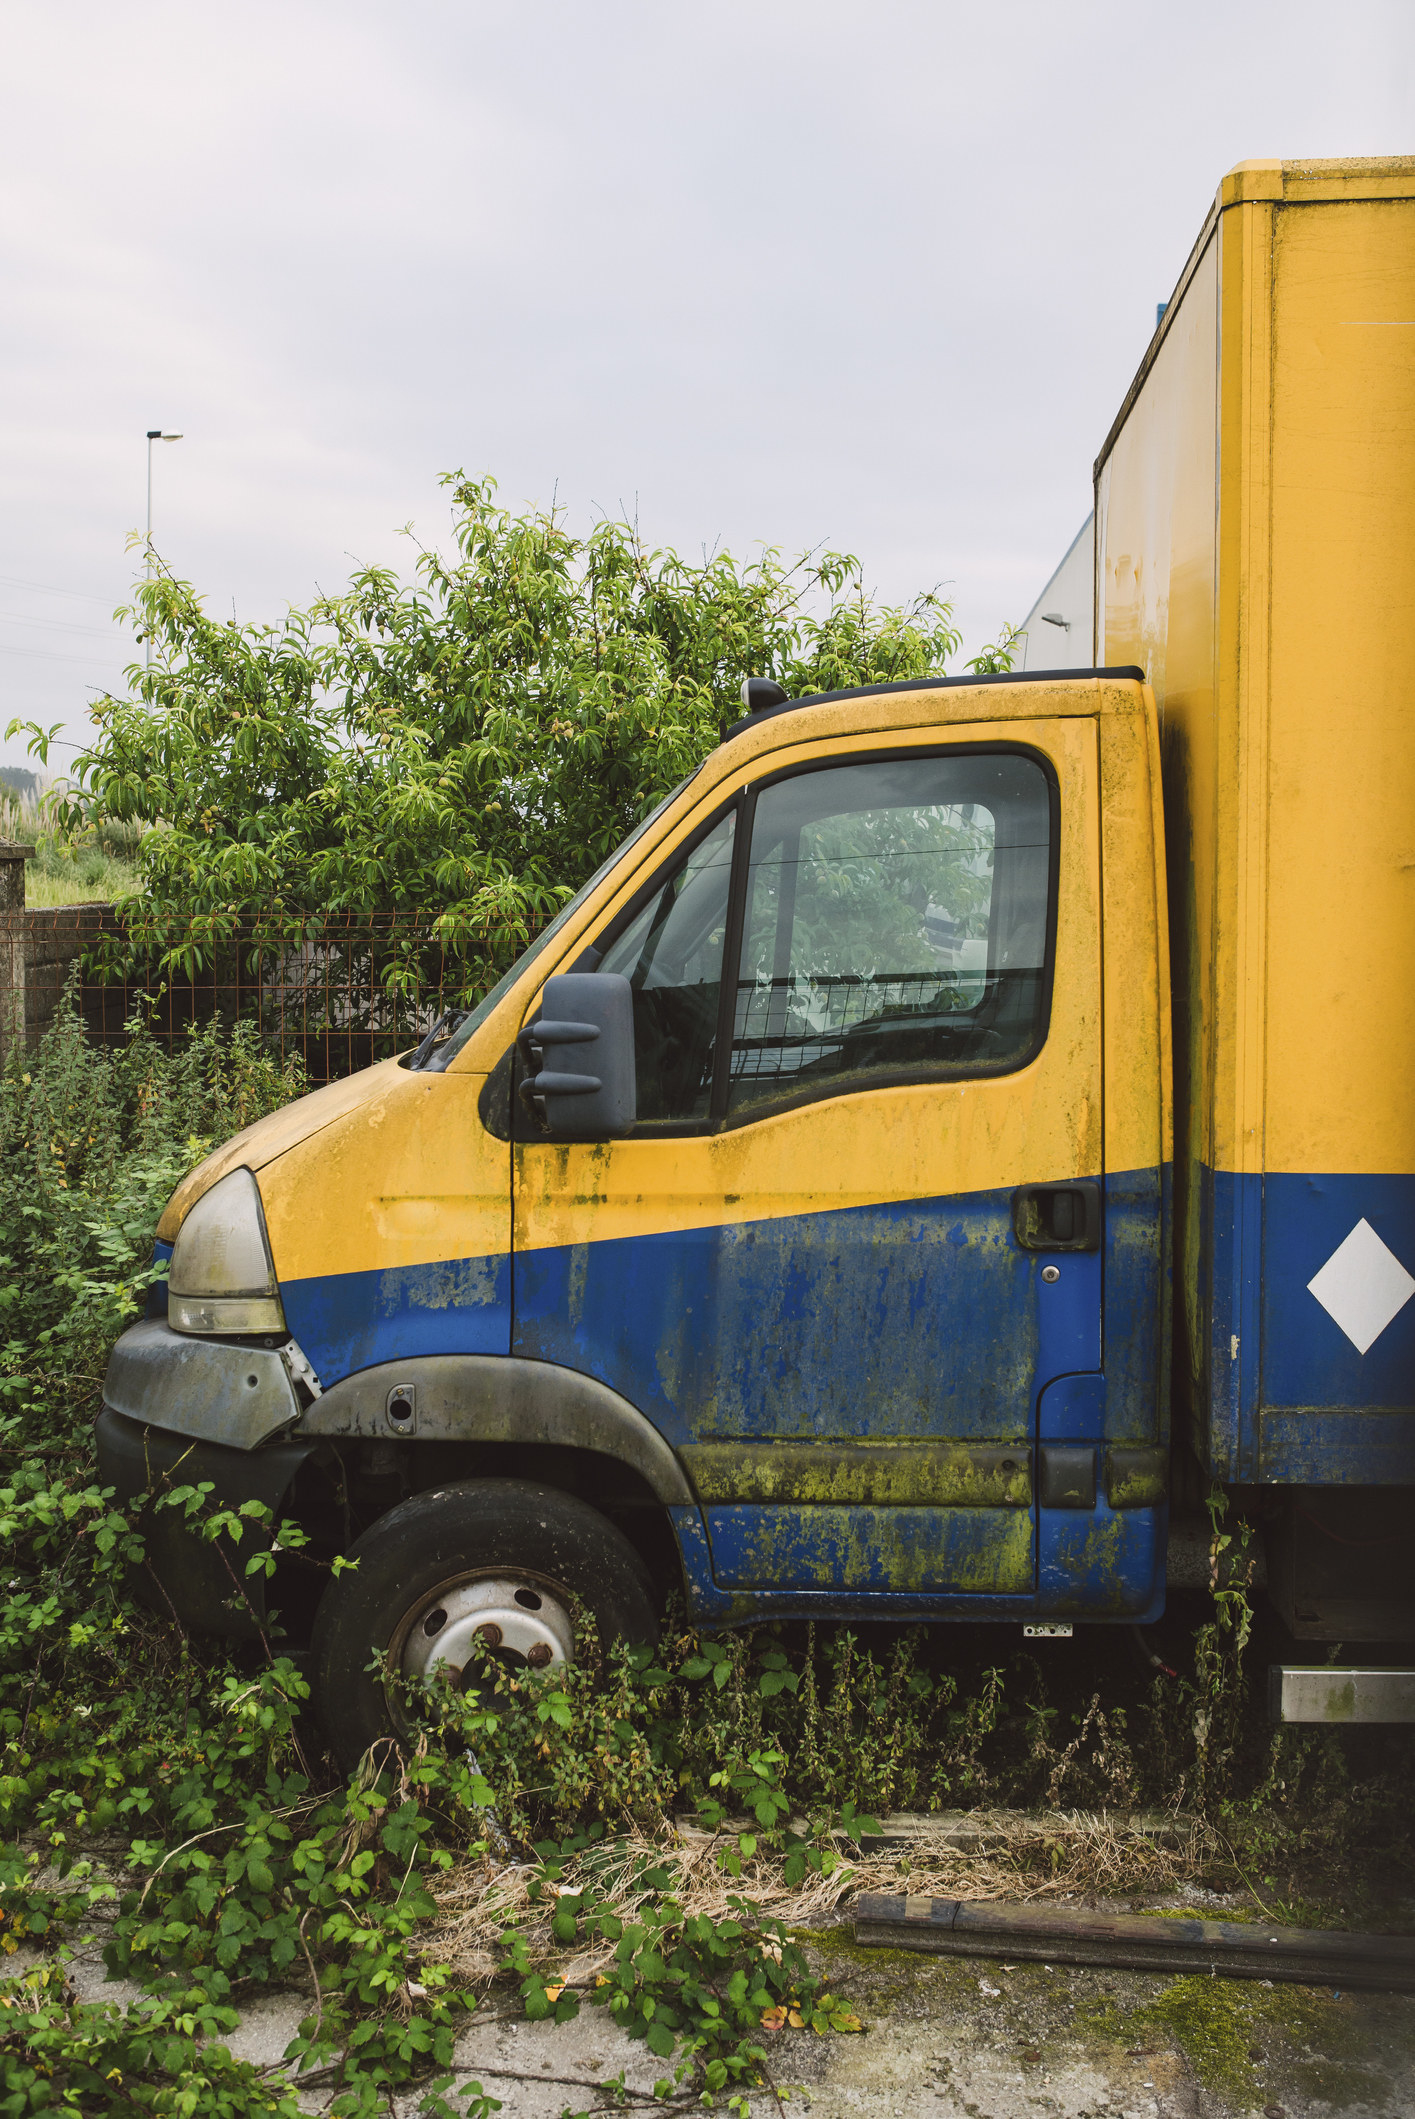 An abandoned truck sits in unkempt greenery